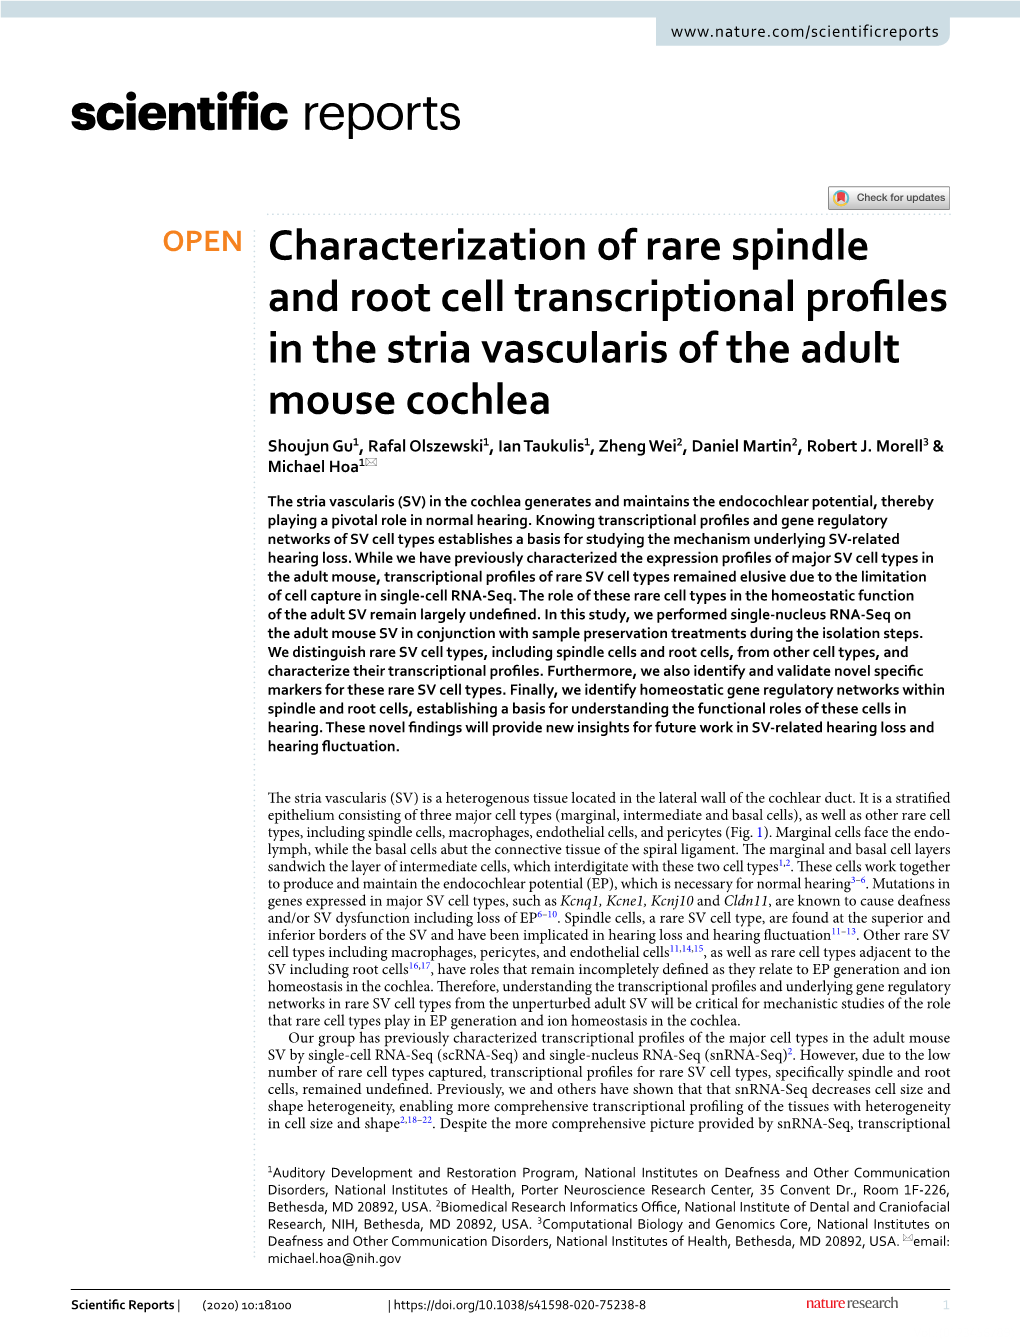 Characterization of Rare Spindle and Root Cell Transcriptional Profiles in the Stria Vascularis of the Adult Mouse Cochlea